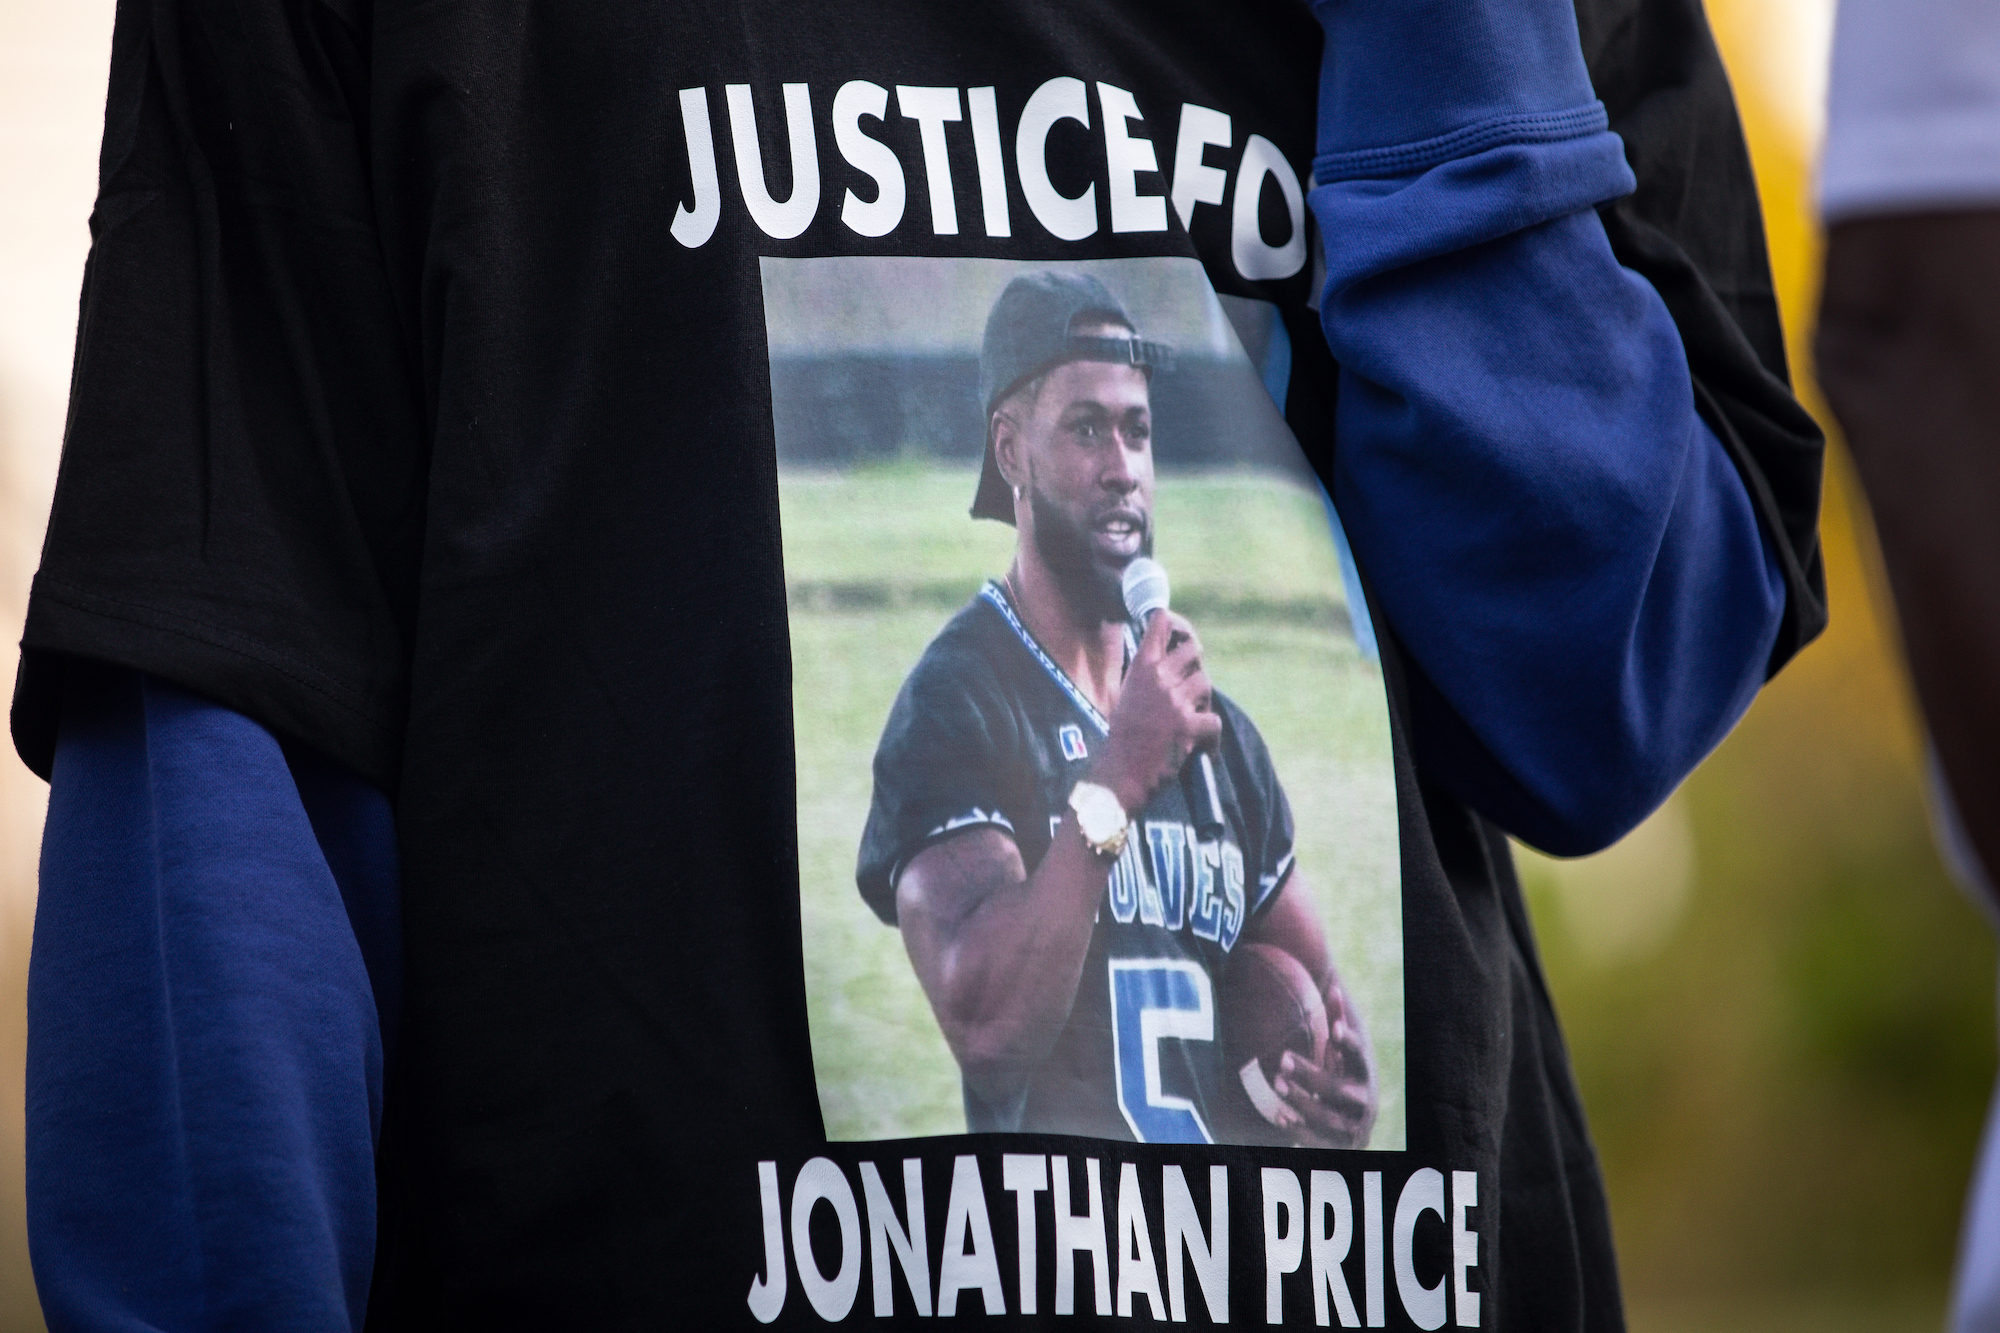 Wolfe City police officer Shaun Lucas has been charged in relation to the fatal shooting of Jonathan Price on Oct. 3, 2020, after Price allegedly tried to stop a domestic dispute. (Montinique Monroe—Getty Images)